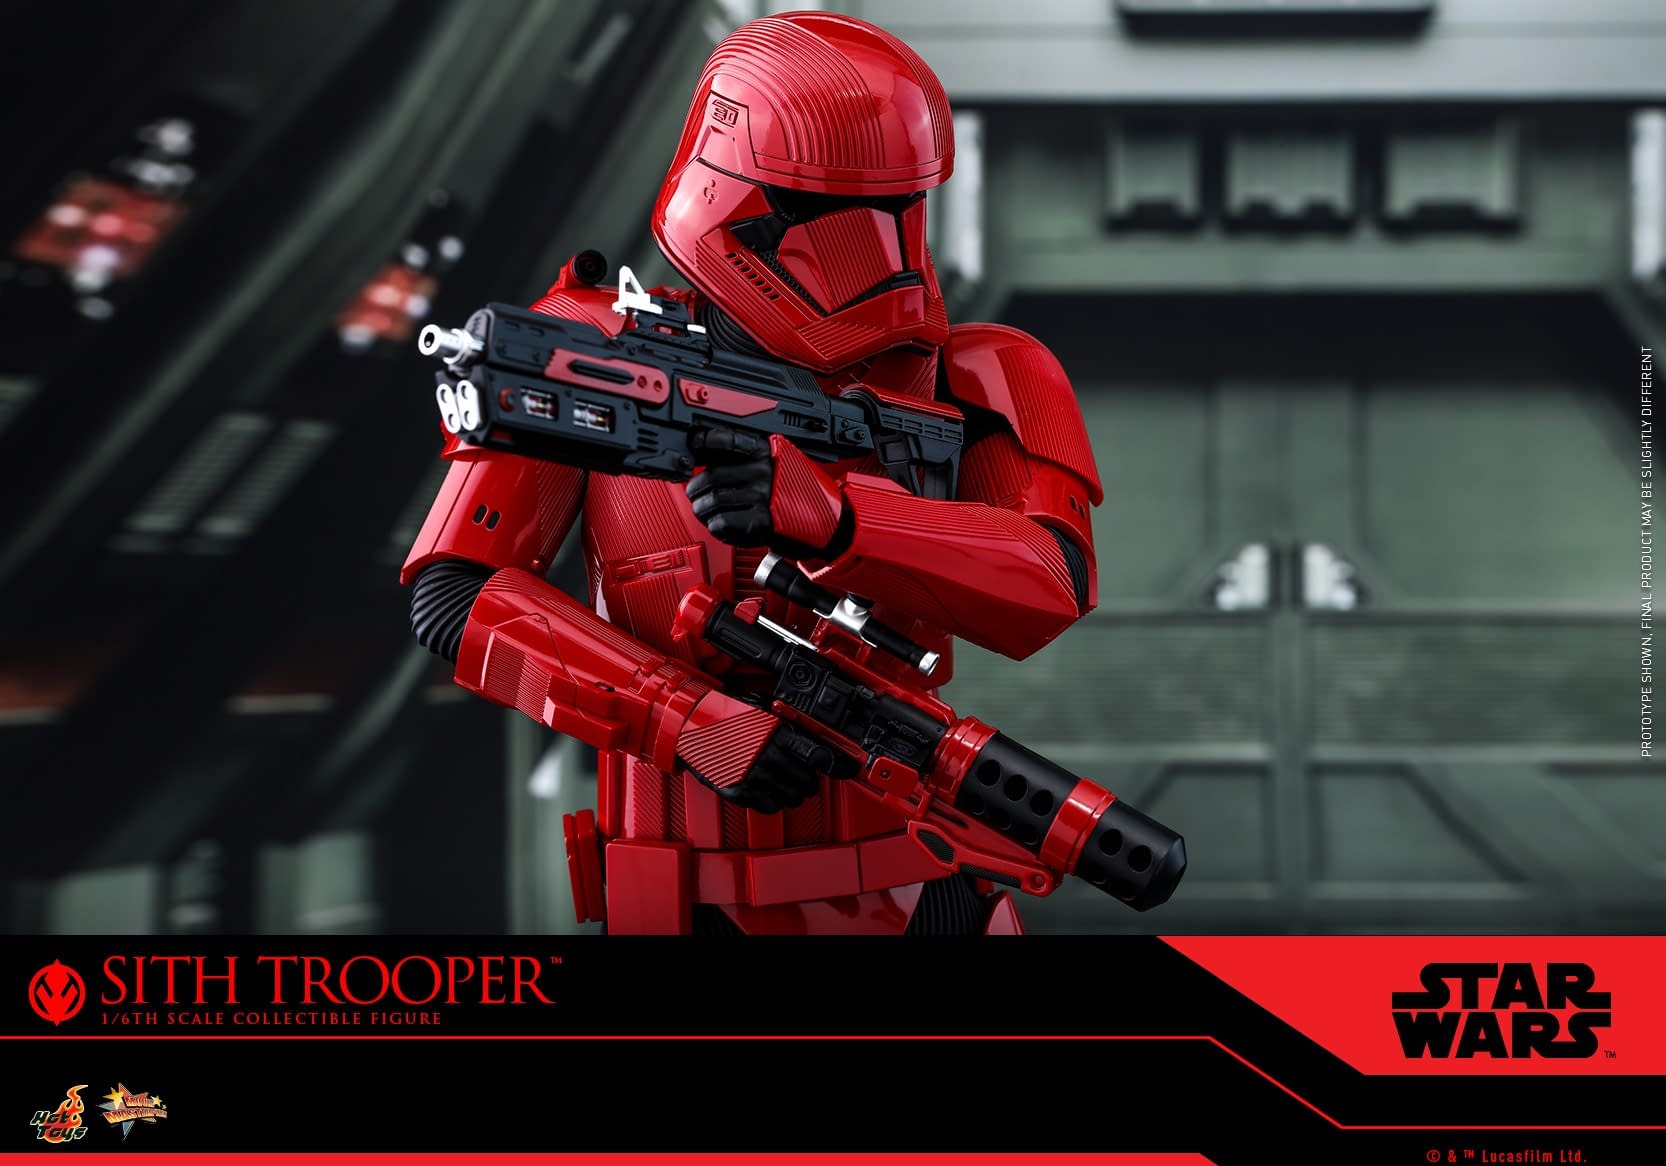 Sith Trooper Helps You Embrace the Darkside with New Hot Toys Figure